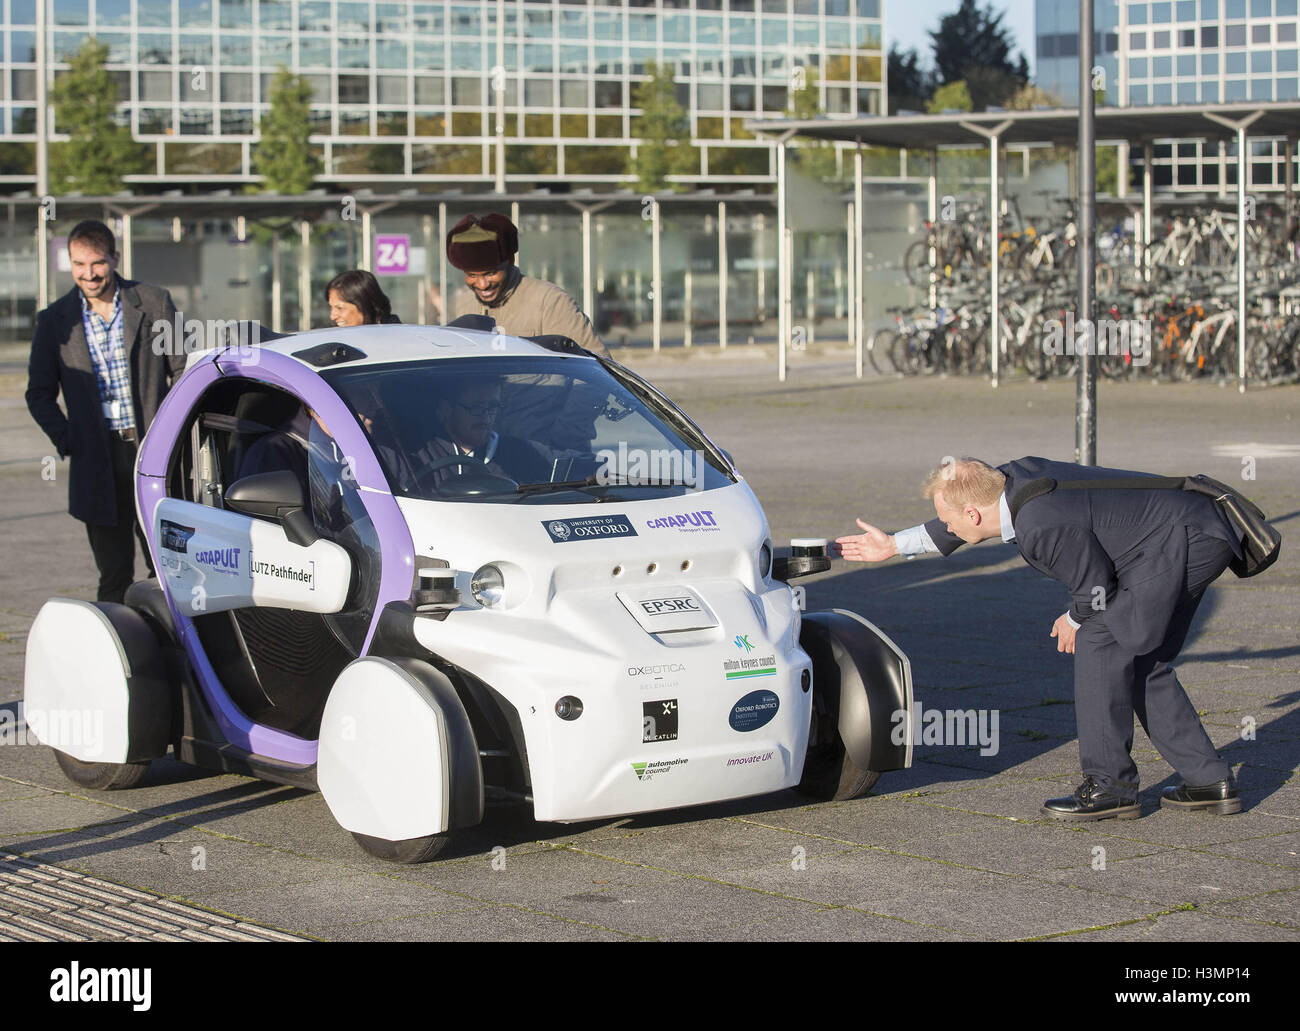 EDITORIAL USE ONLY General views of the UK's Transport Systems Catapult self-driving vehicle travelling around Milton Keynes, during a successful test-drive in public for the first time, as part of the LUTZ Pathfinder Project. Stock Photo